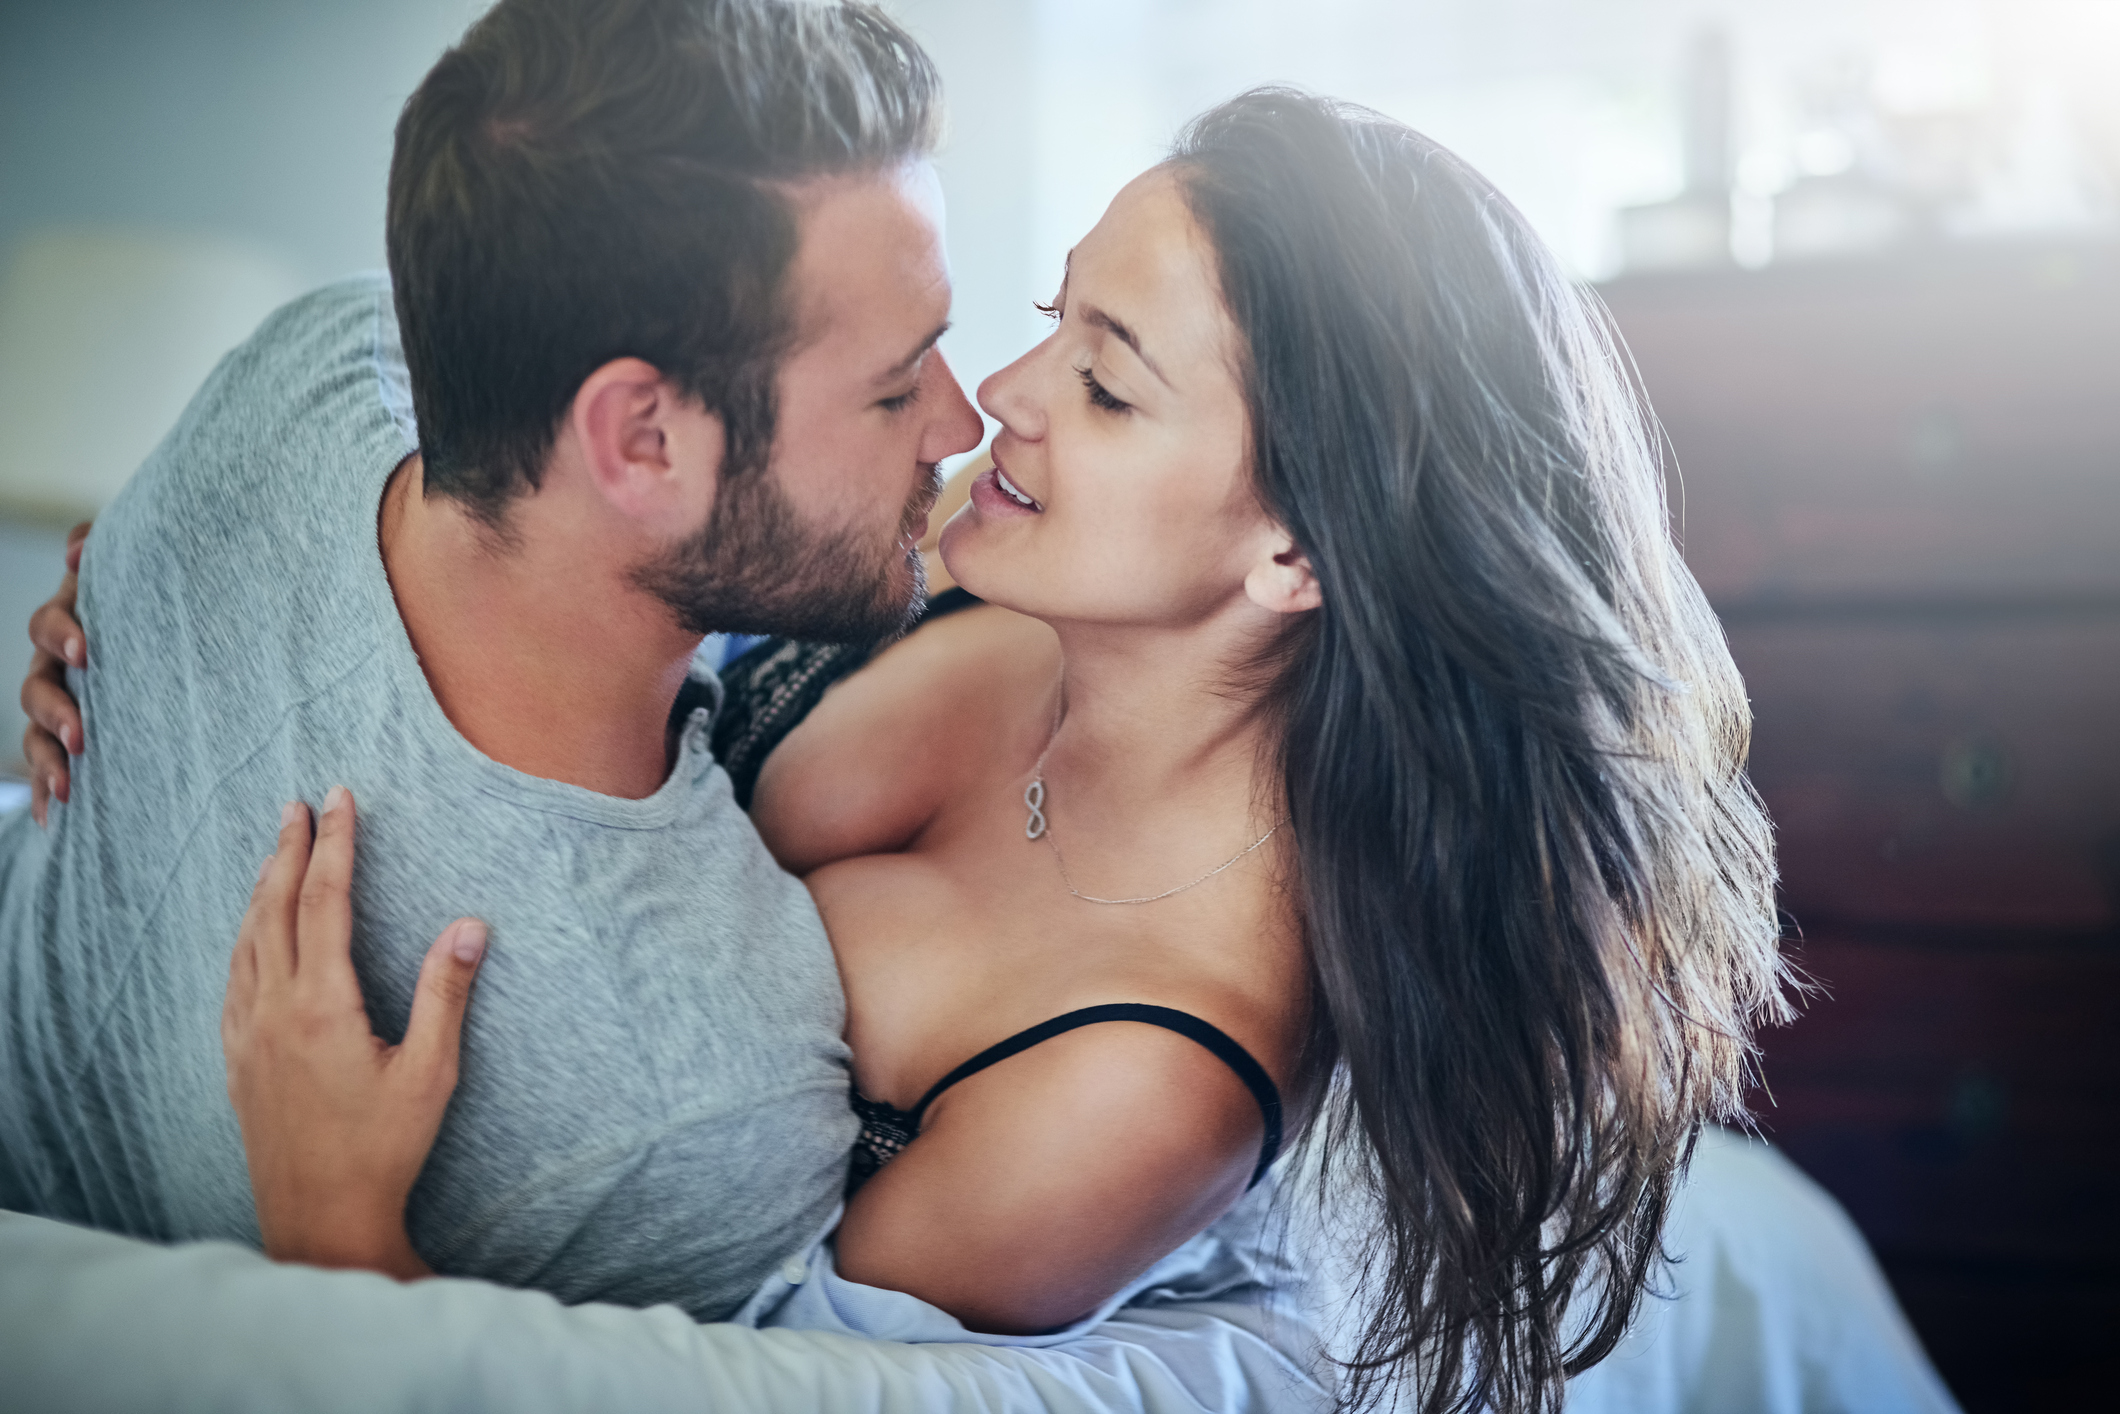 This Is How To Keep Your Sex Life Ultra Satisfying According To